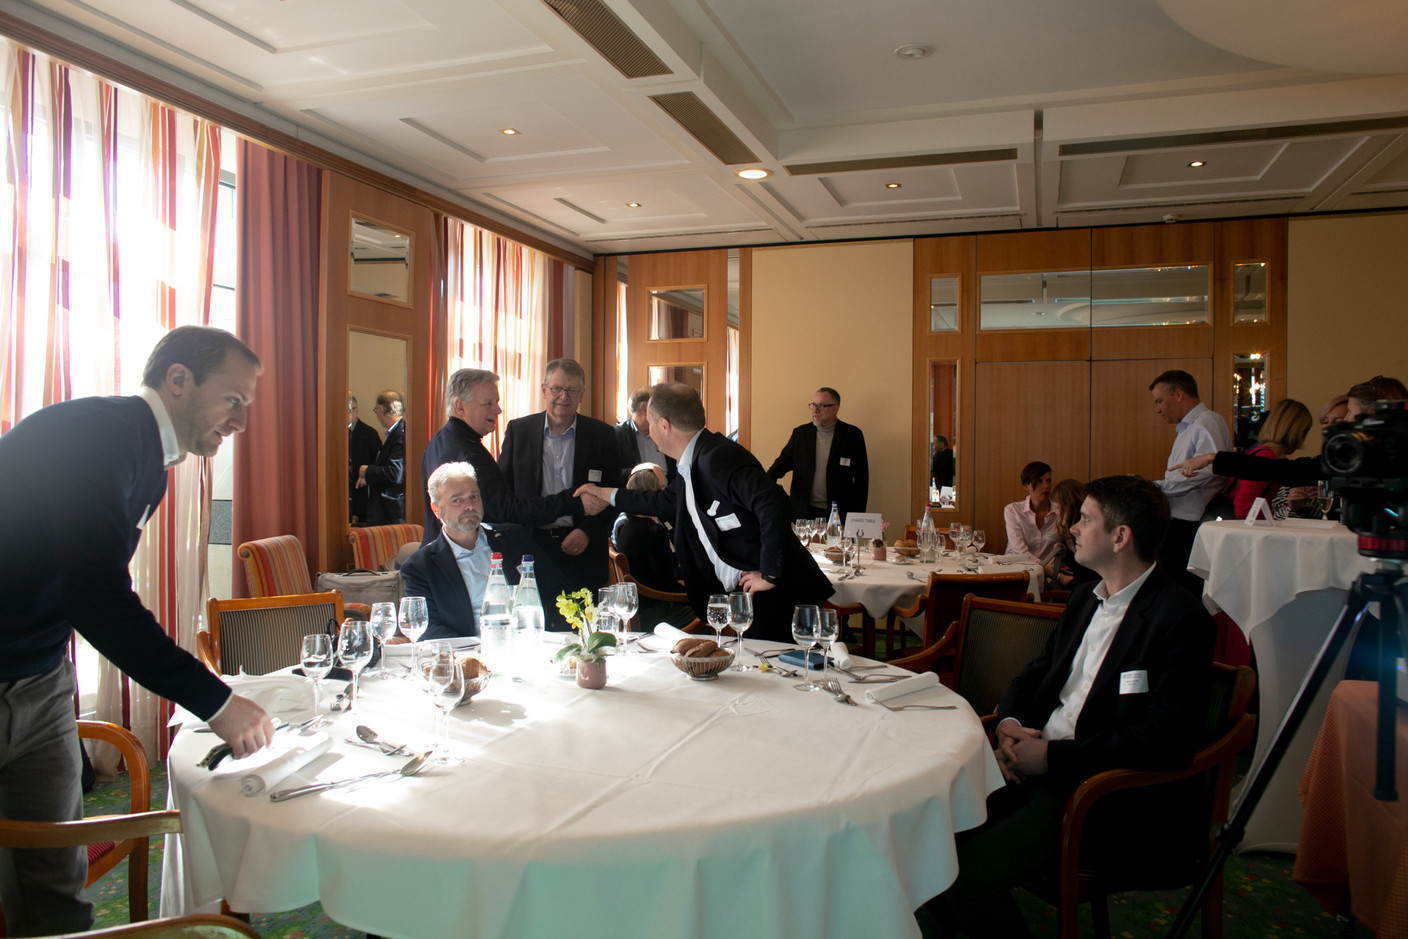 Attendees at the Impact Luxembourg lunch event, hosted by the British Chamber of Commerce on 21 February 2023 at the Hotel Parc Belair. Photo: Matic Zorman / Maison Moderne